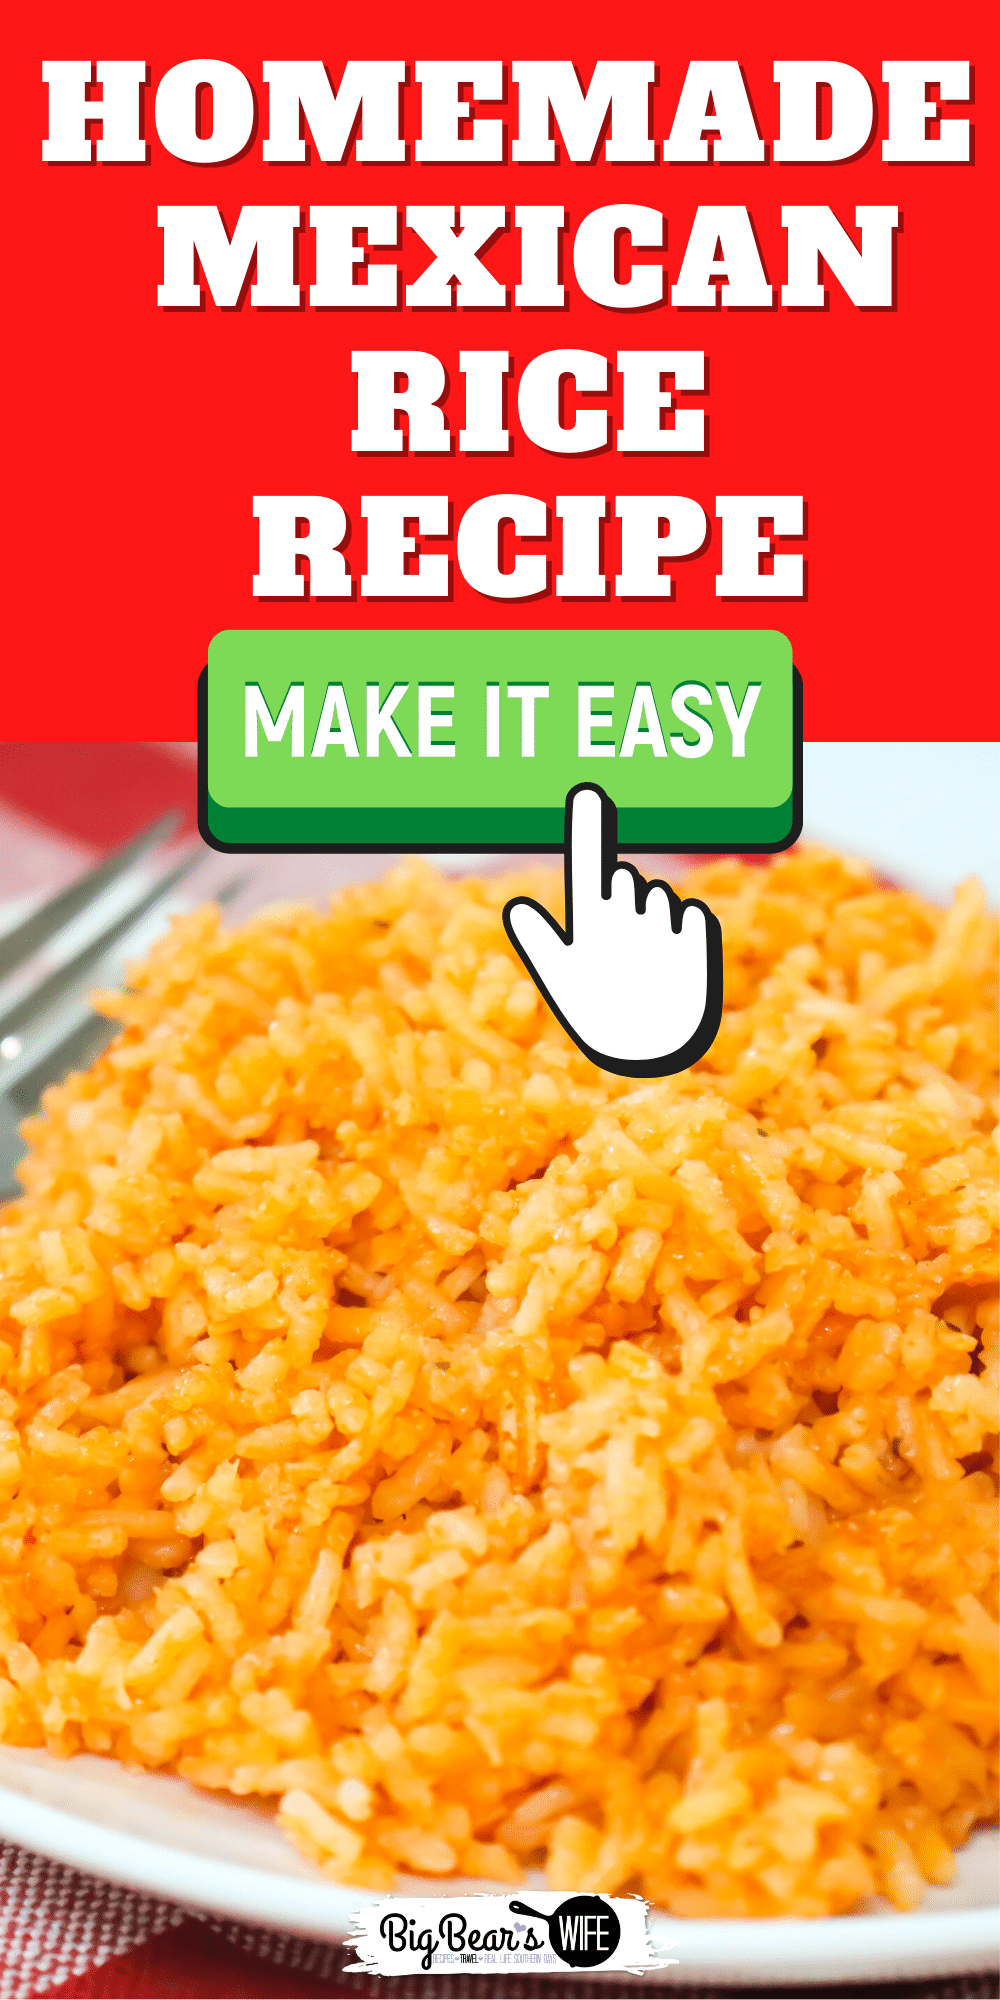 Homemade Mexican rice is so easy to make and taste just like the rice from the Mexican restaurants! You'll love this homemade version that is perfect for serving with enchiladas, tacos, chicken, shrimp or just with a side of queso!  via @bigbearswife